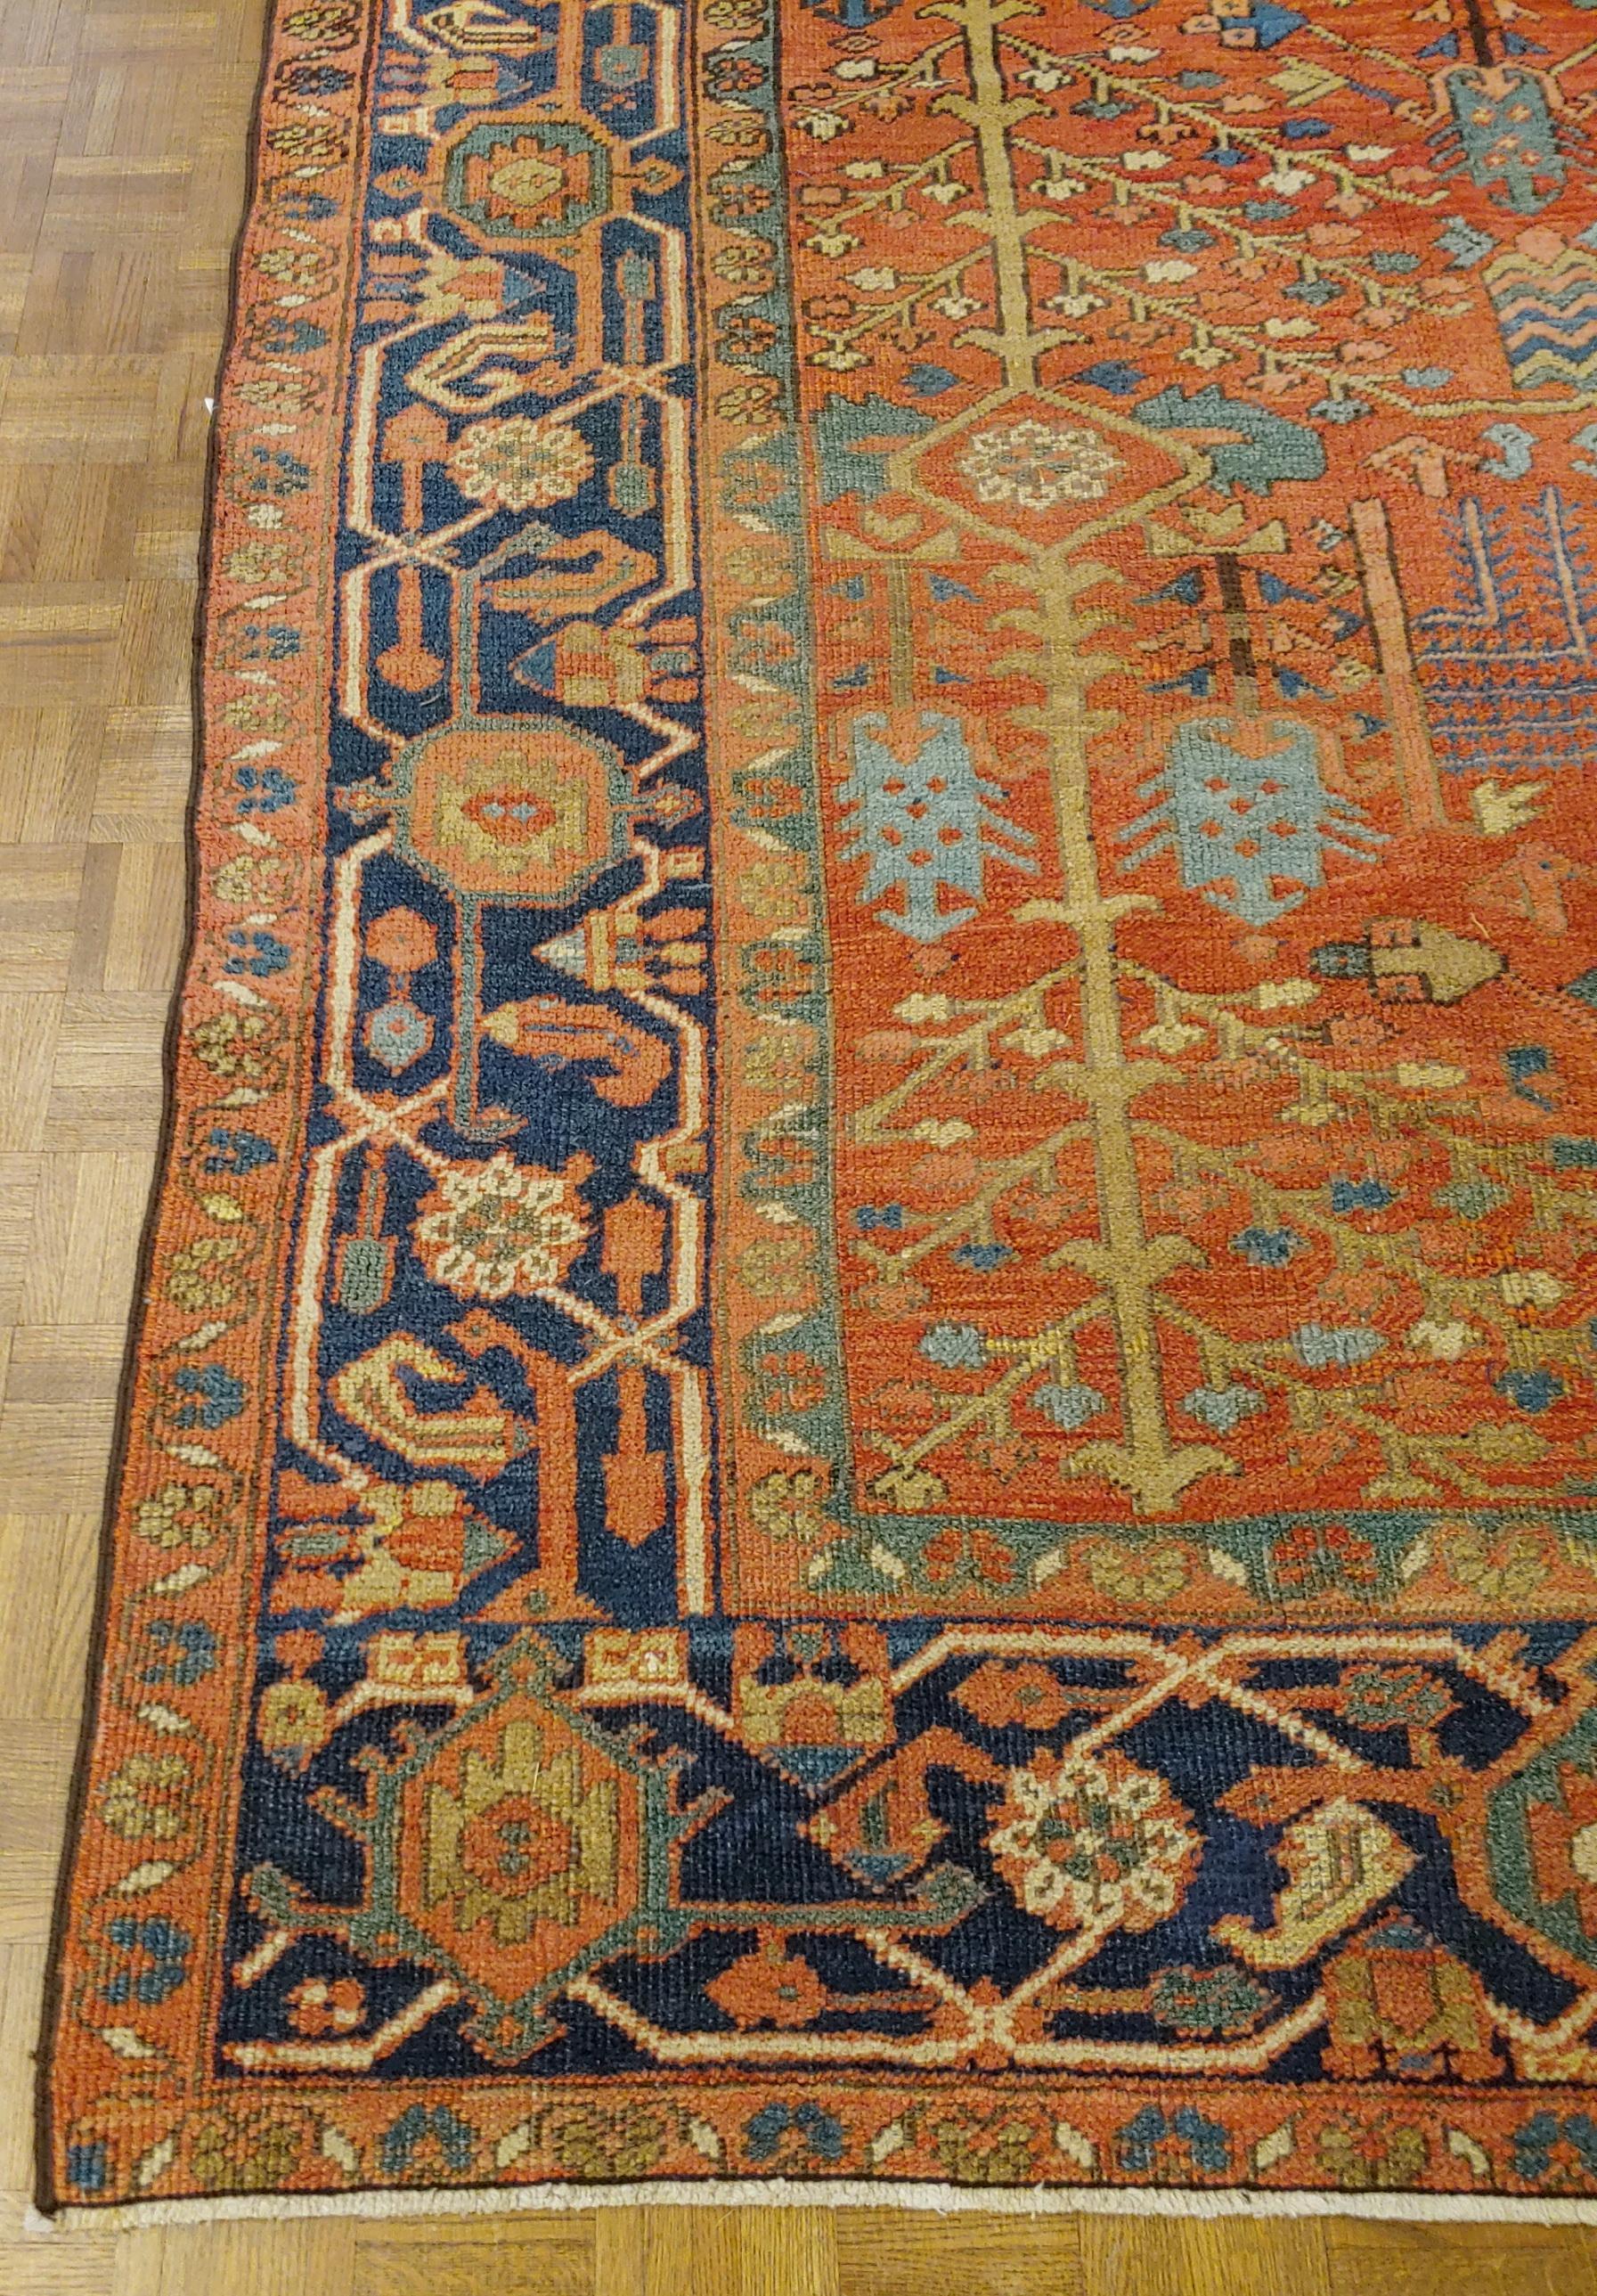 Very unusual all-over pattern early Persian Heriz. It is room size, 9-4 x 11-4. The field is covered in decorative tree designs such as weeping willows and cypresses, circa 1915.